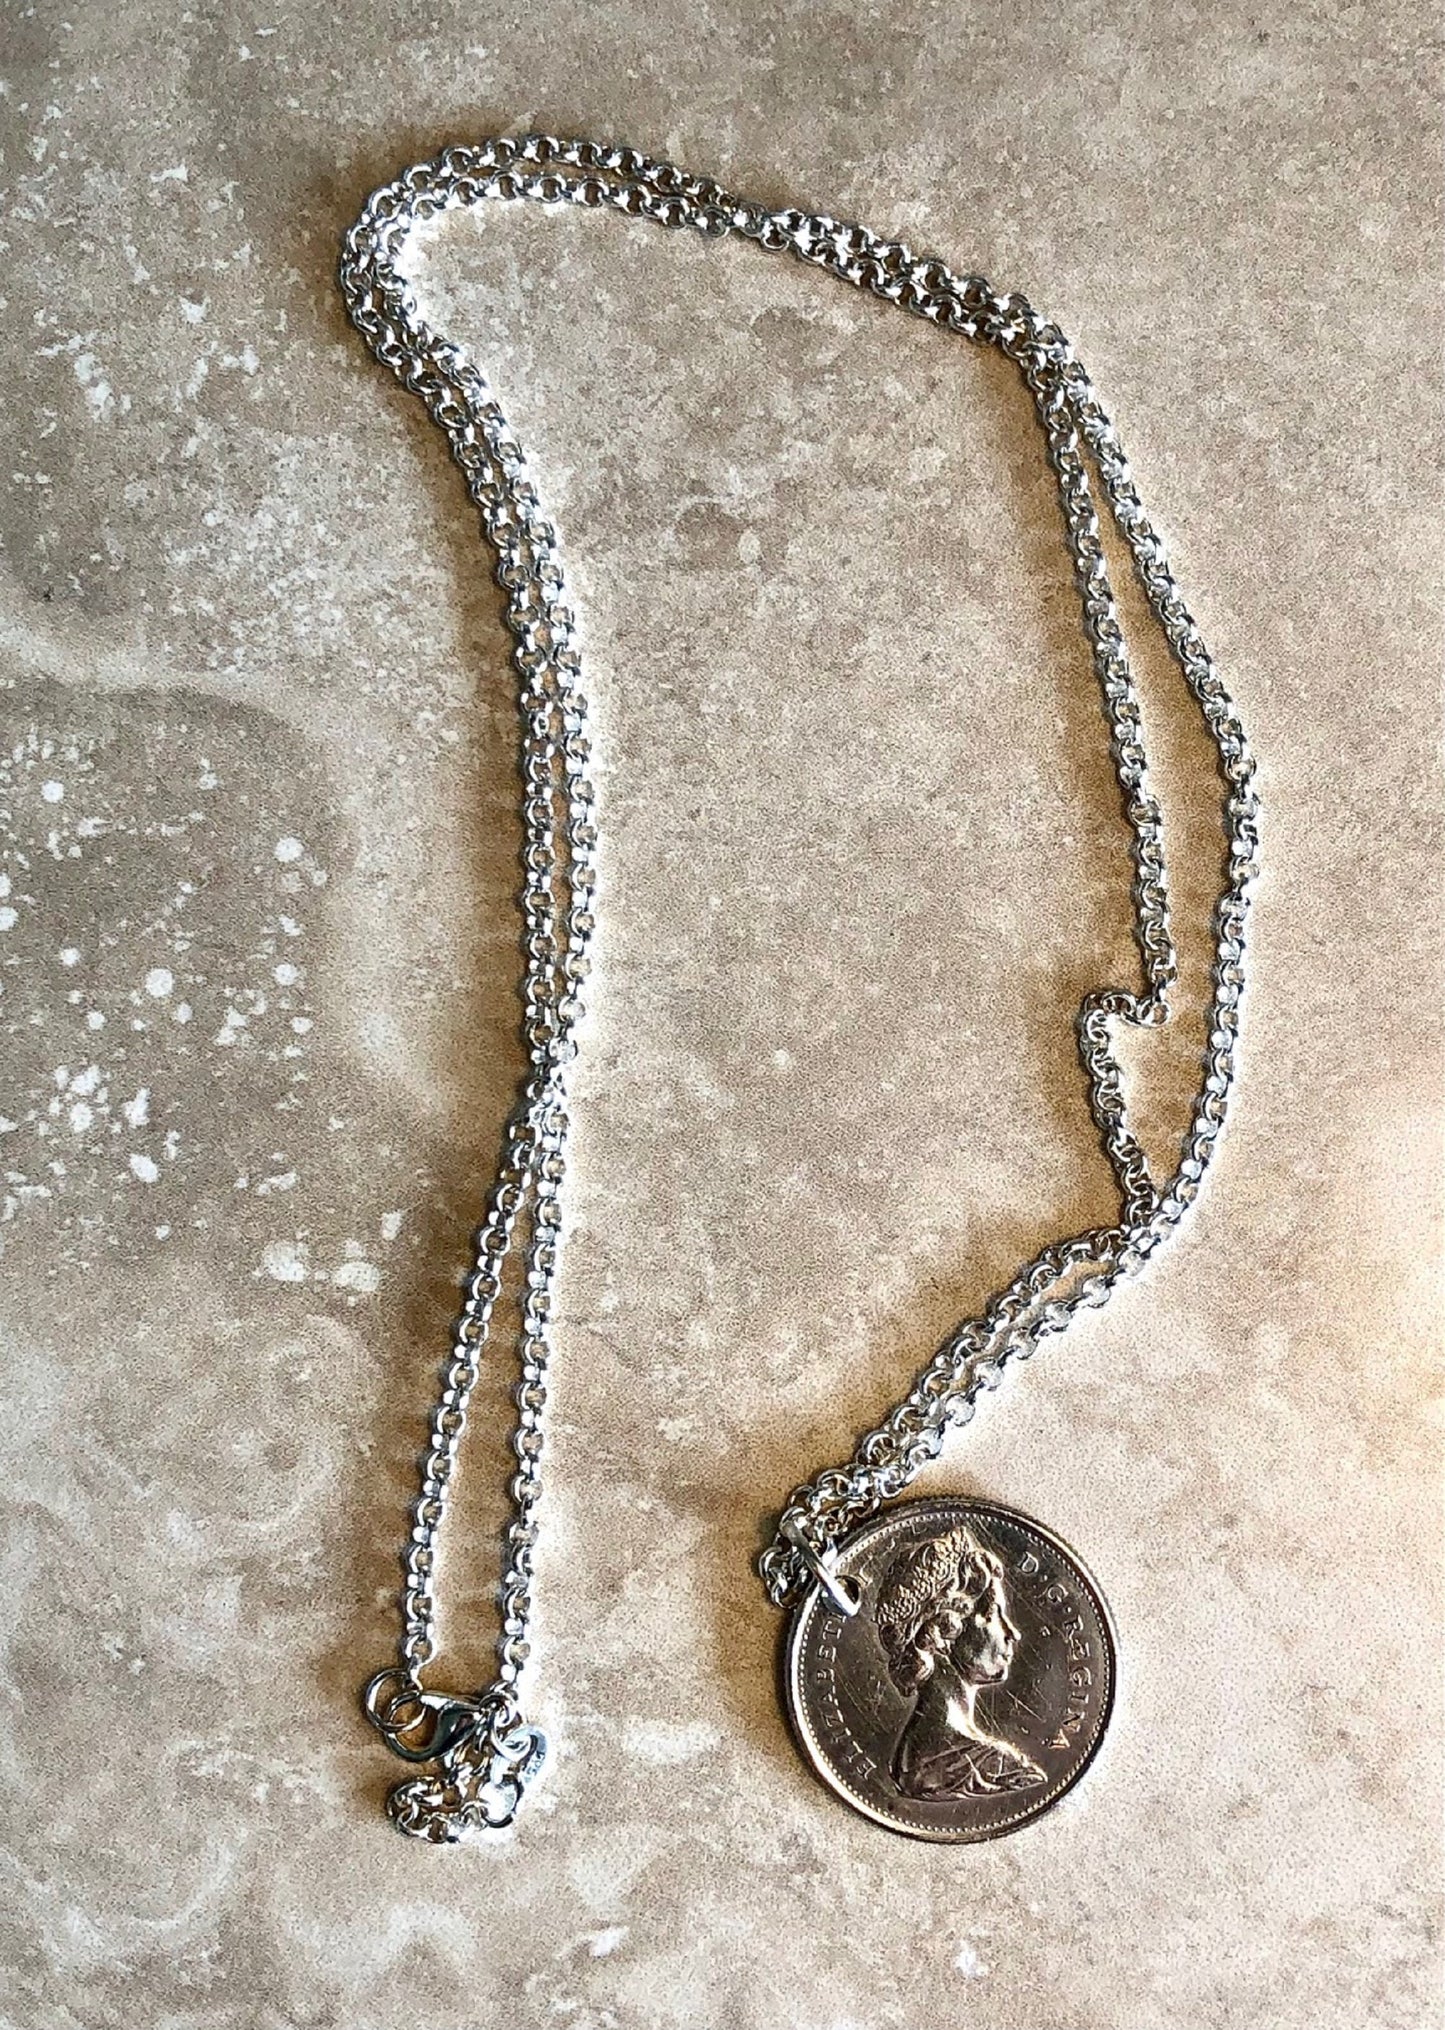 Canadian Dime Coin Pendant Necklace Canada 1967 Silver 10 Cents Custom Made Vintage and Rare coins - Coin Enthusiast - Fashion Accessory.